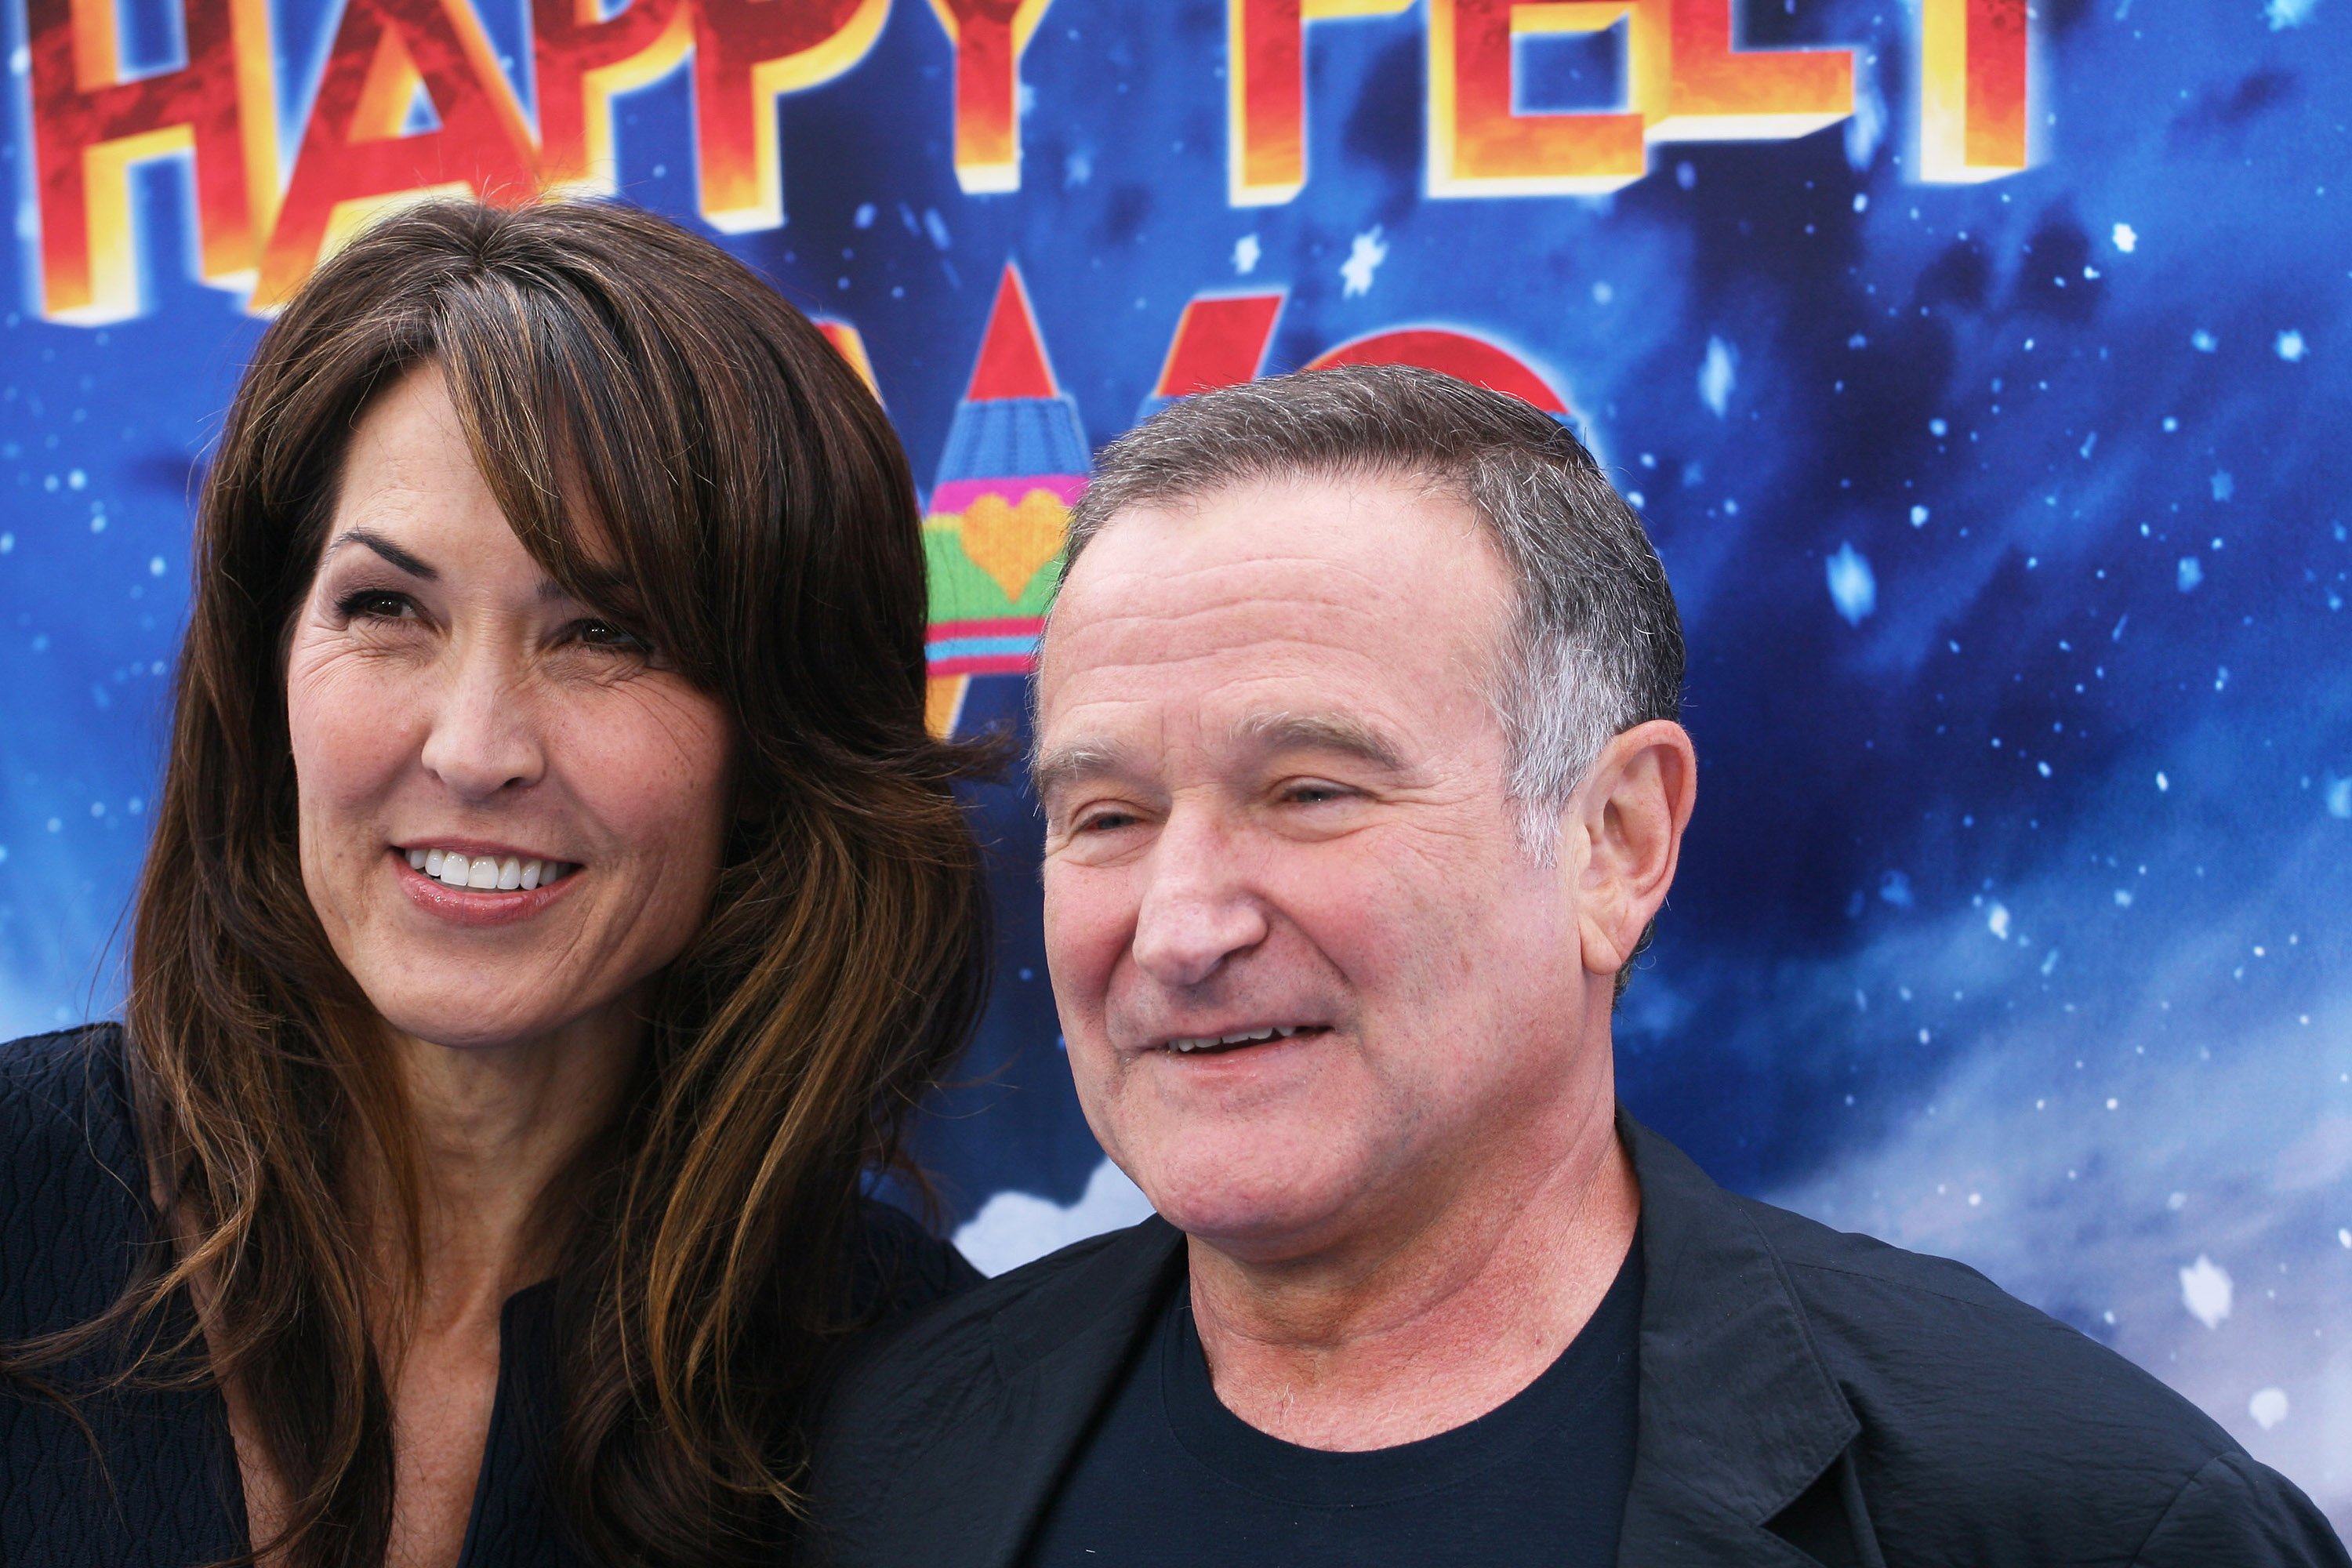 Actor Robin Williams and Susan Schneider attend the "Happy Feet Two" Los Angeles premiere held at the Grauman's Chinese Theatre on November 13, 2011 in Hollywood, California | Source: Getty Images 